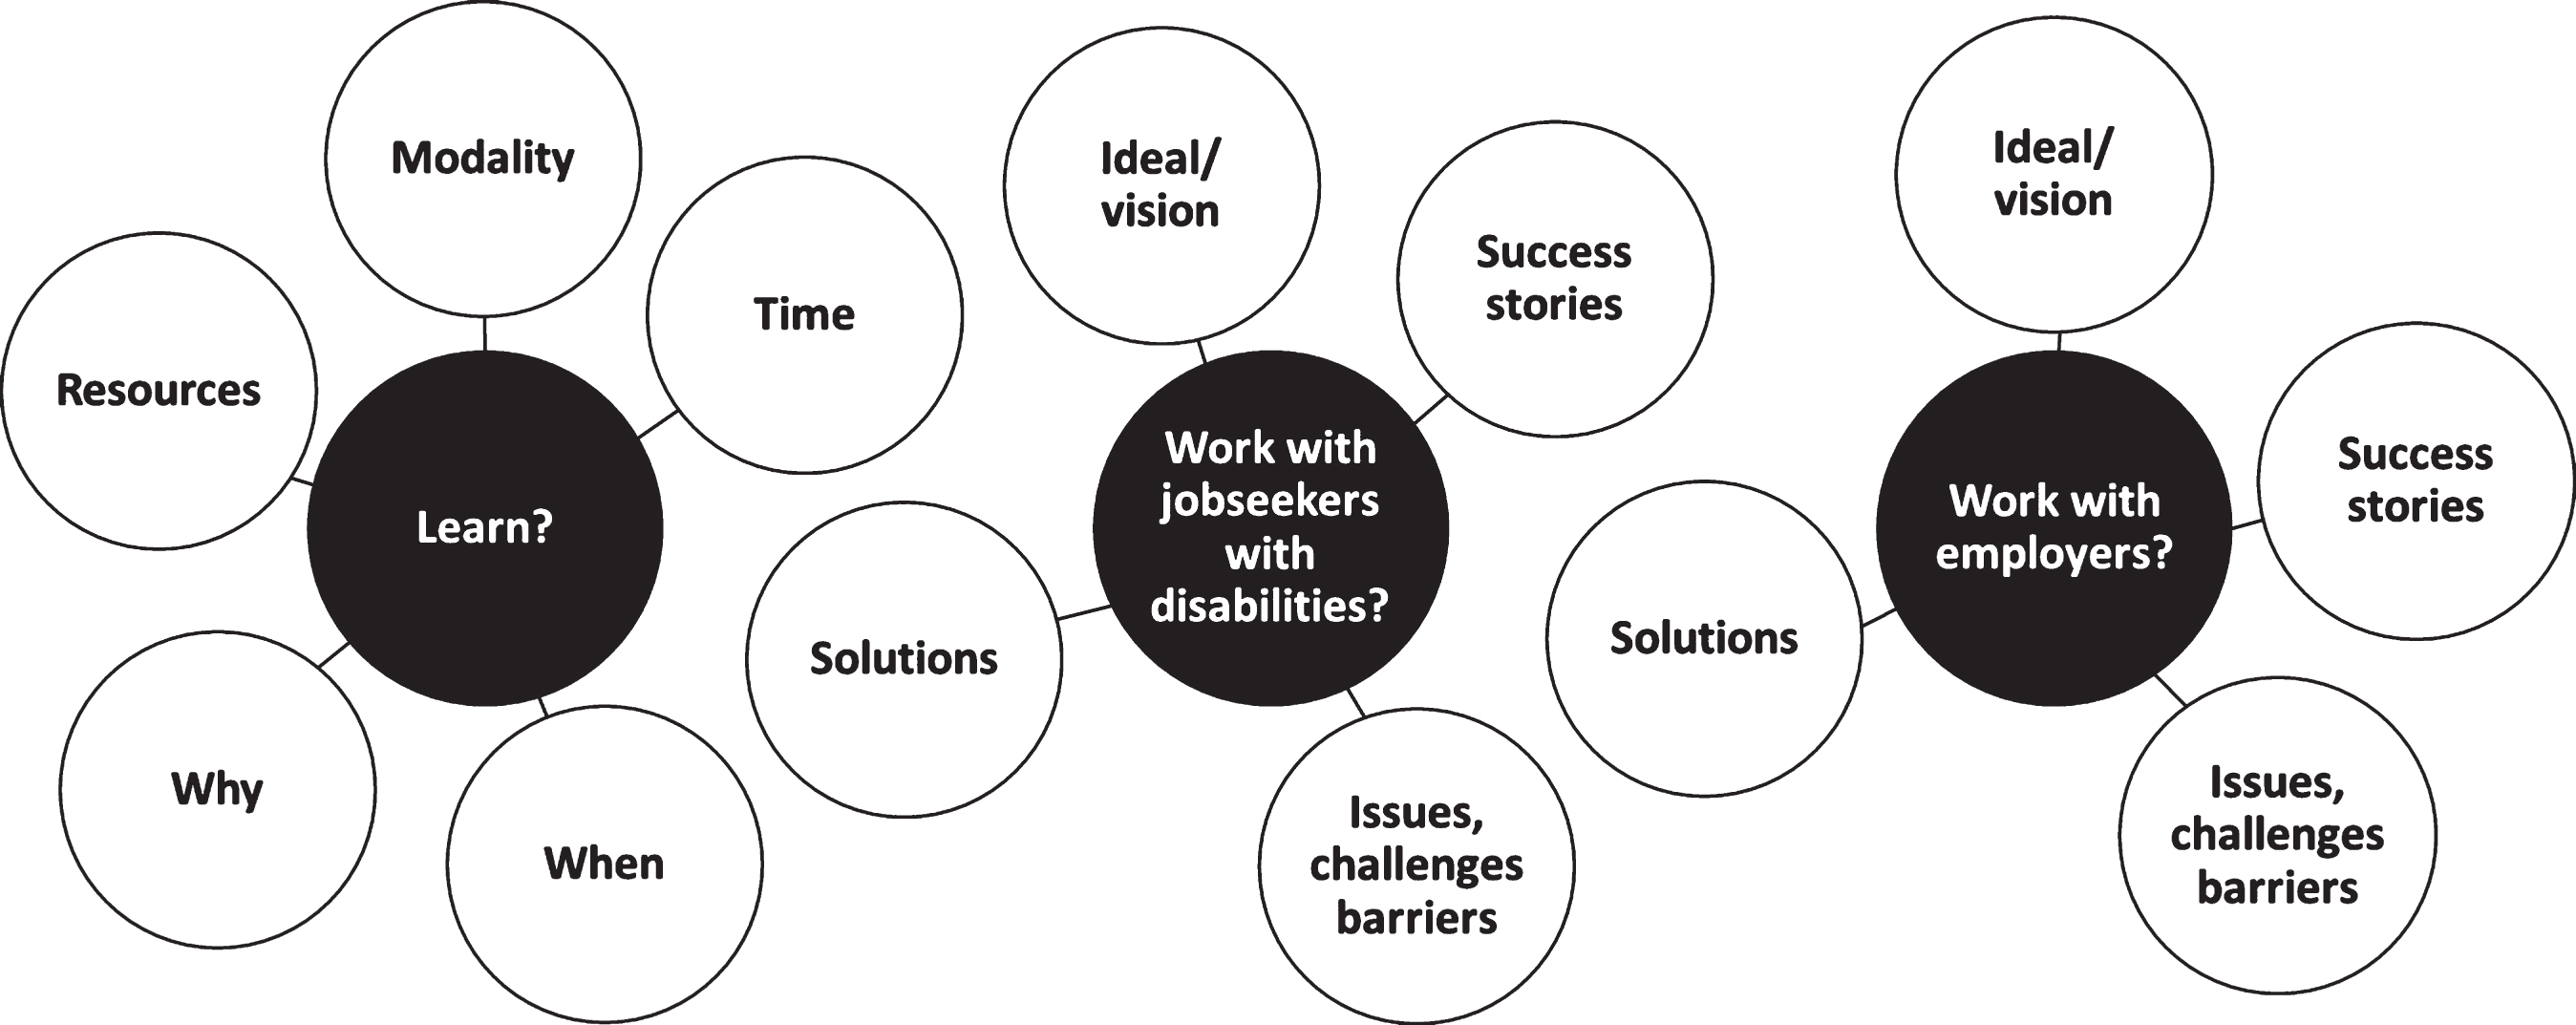 Knowledge-need framework for the qualitative inquiry: “How do people in the employment service professional field learn, how do they work with job seekers with disabilities, and how do they work with employers?”